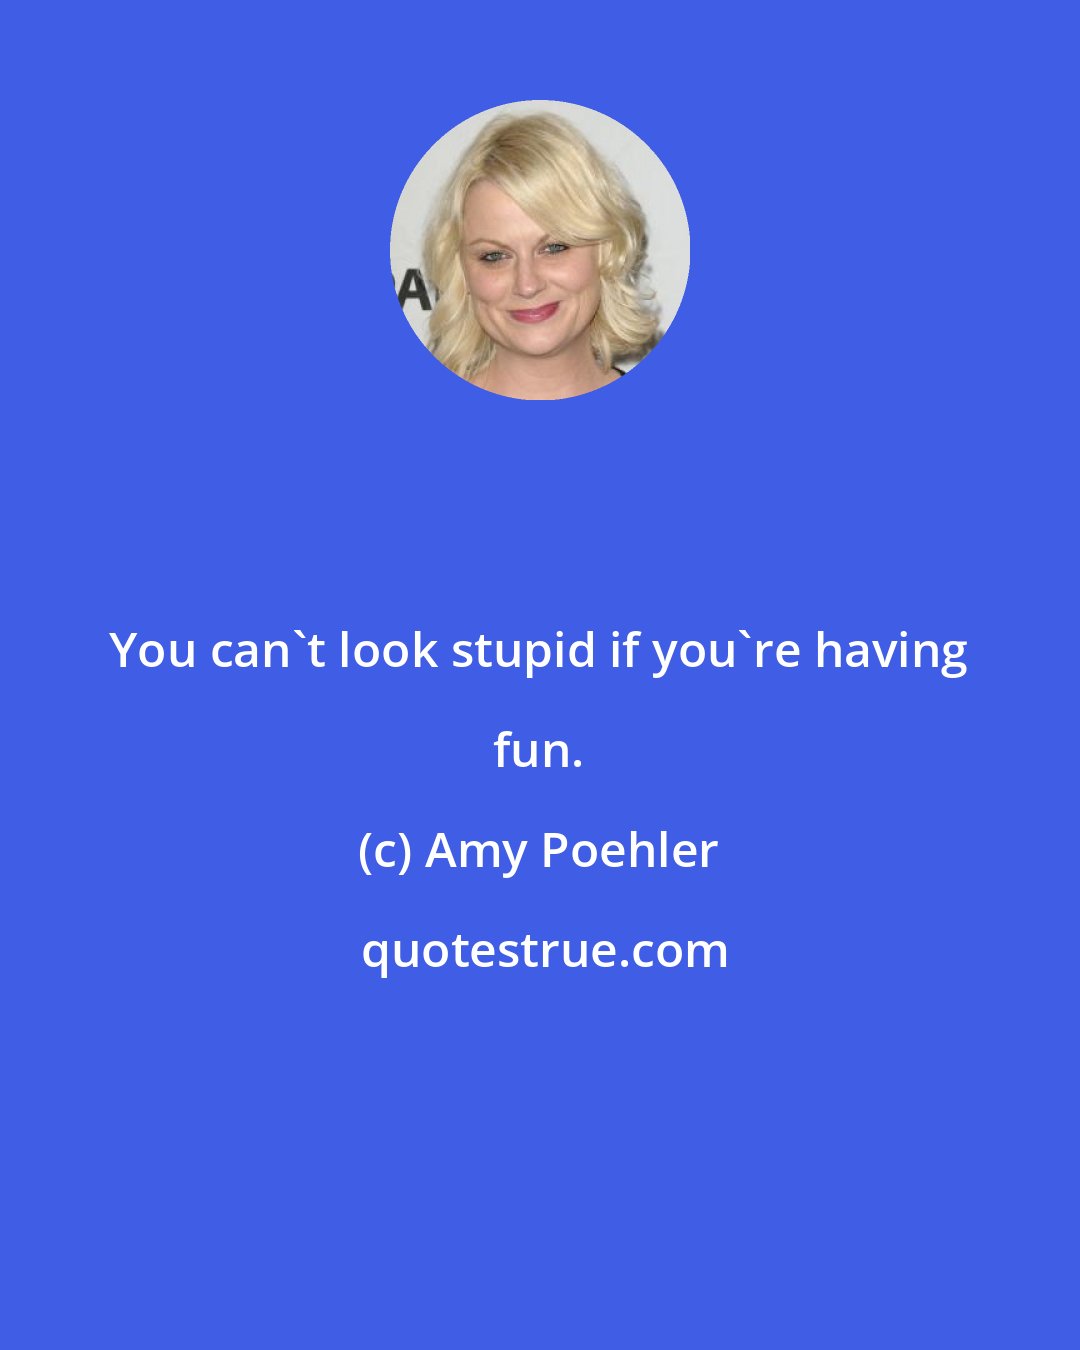 Amy Poehler: You can't look stupid if you're having fun.